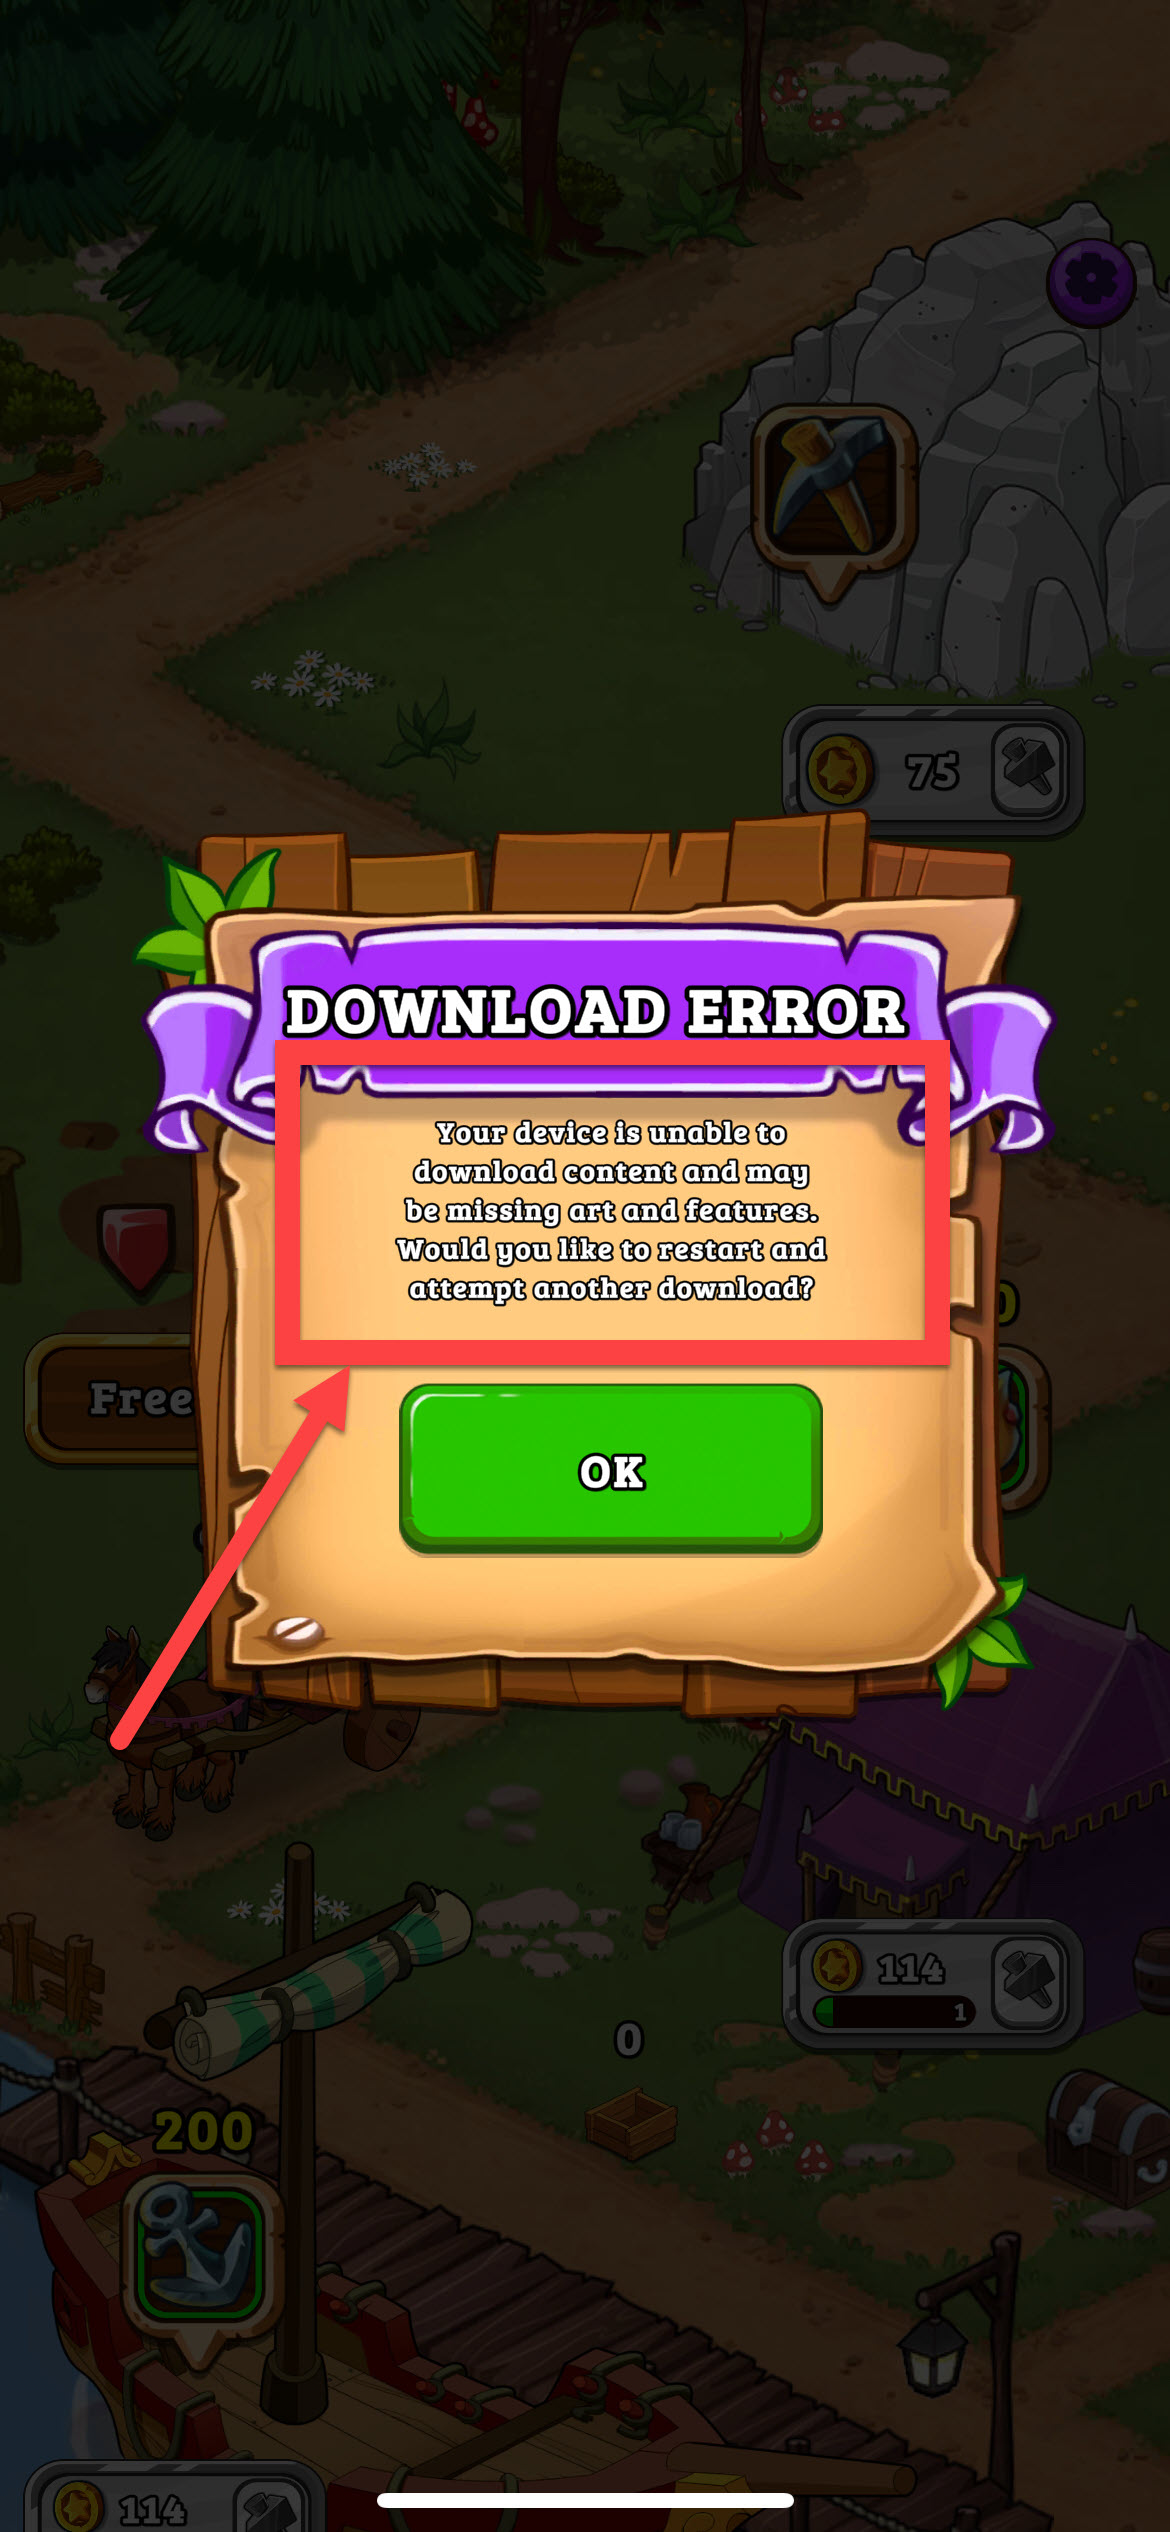 Download Error message appears after switching to another town